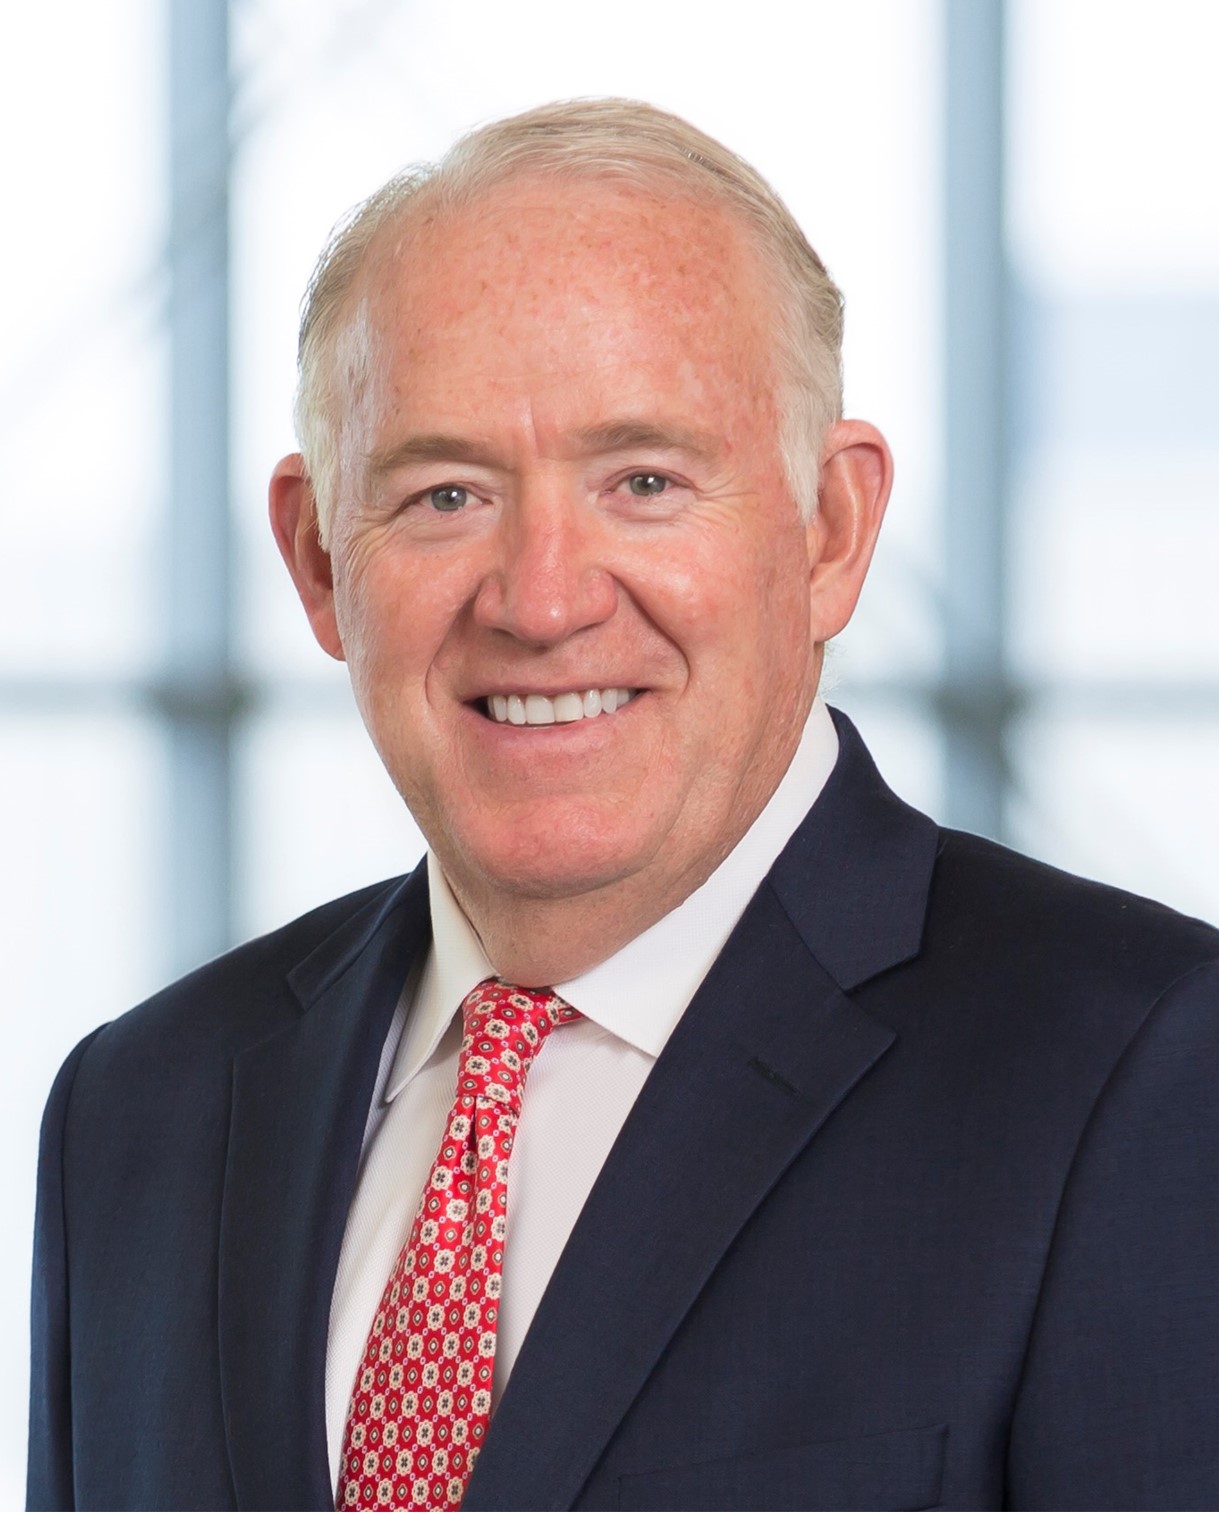 Christopher L. Mapes, Lincoln Electric's Chairman, President and CEO, to retire as President and CEO and will be designated as Executive Chairman, effective January 1, 2024.